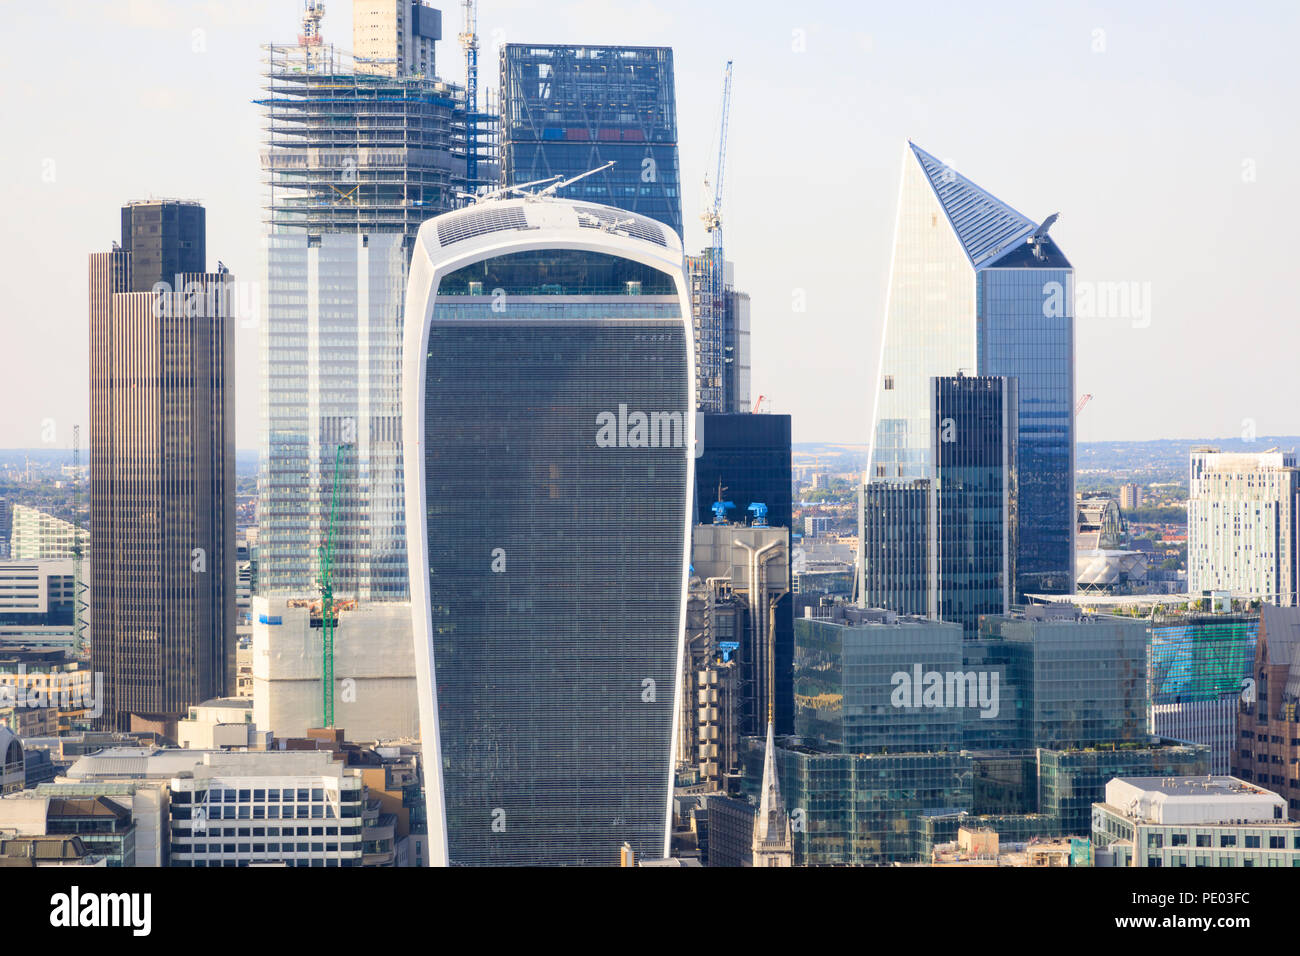 London skyline high rise buildings including the 'Walkie Talkie' and 'Scalpel', London, England Stock Photo